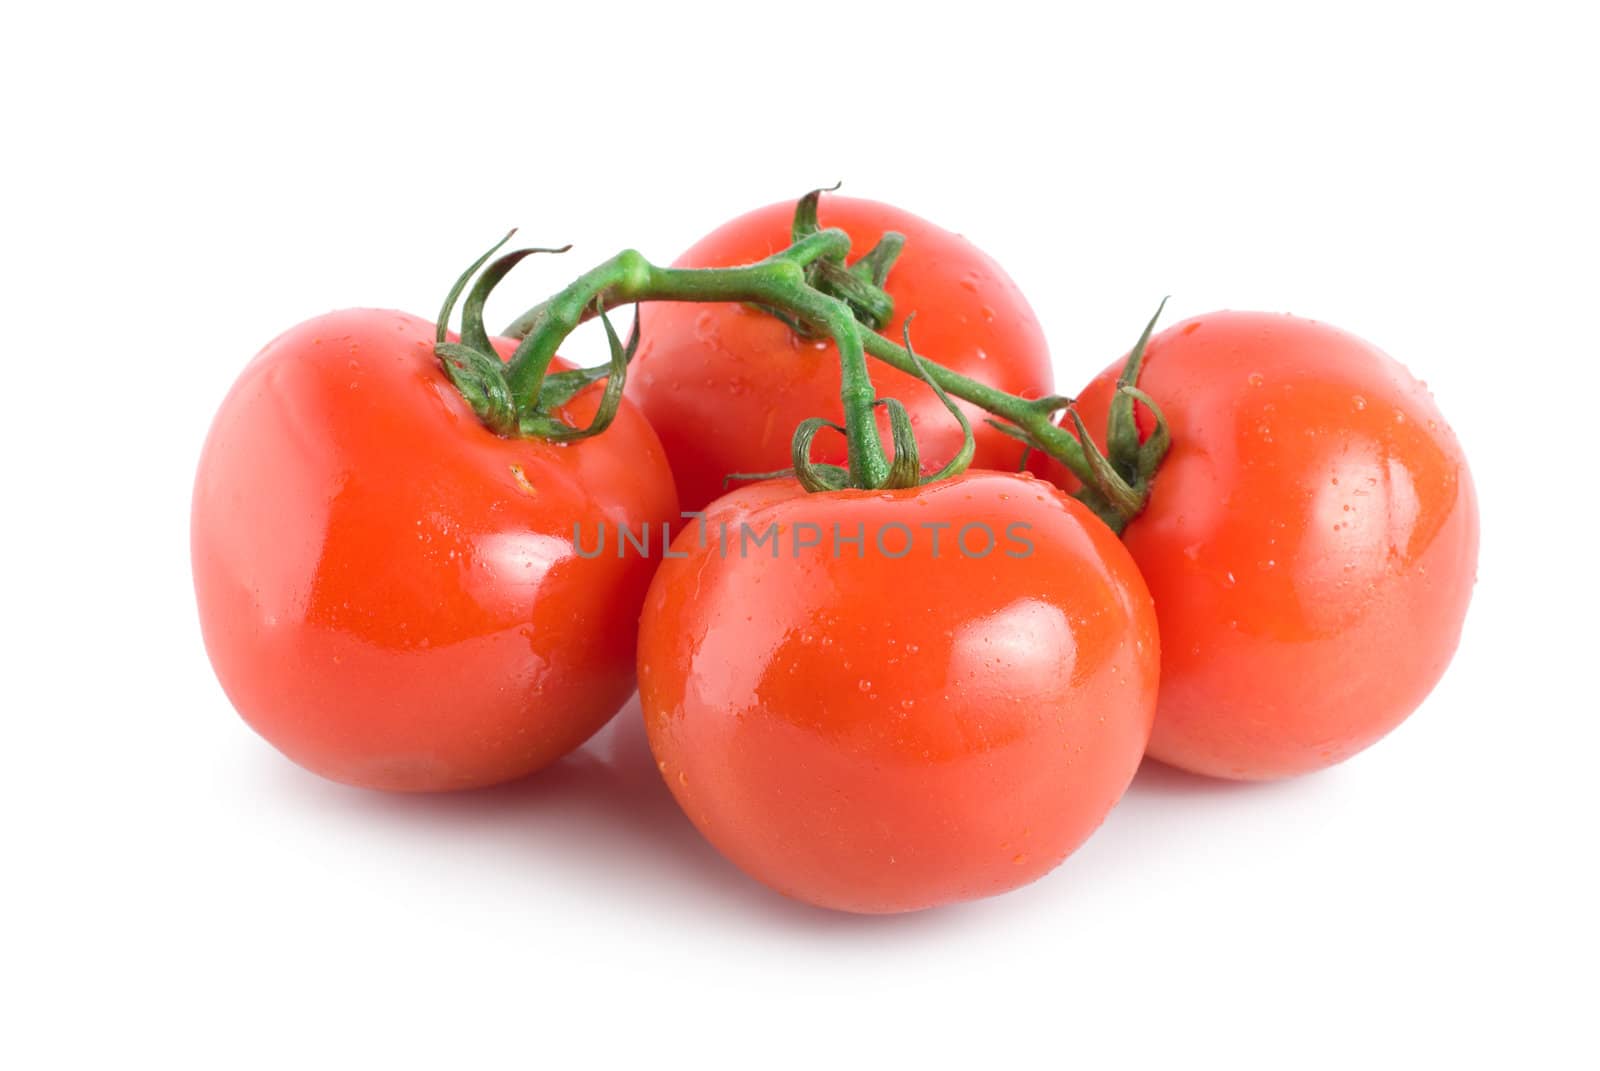 Four ripe tomatoes  by Givaga